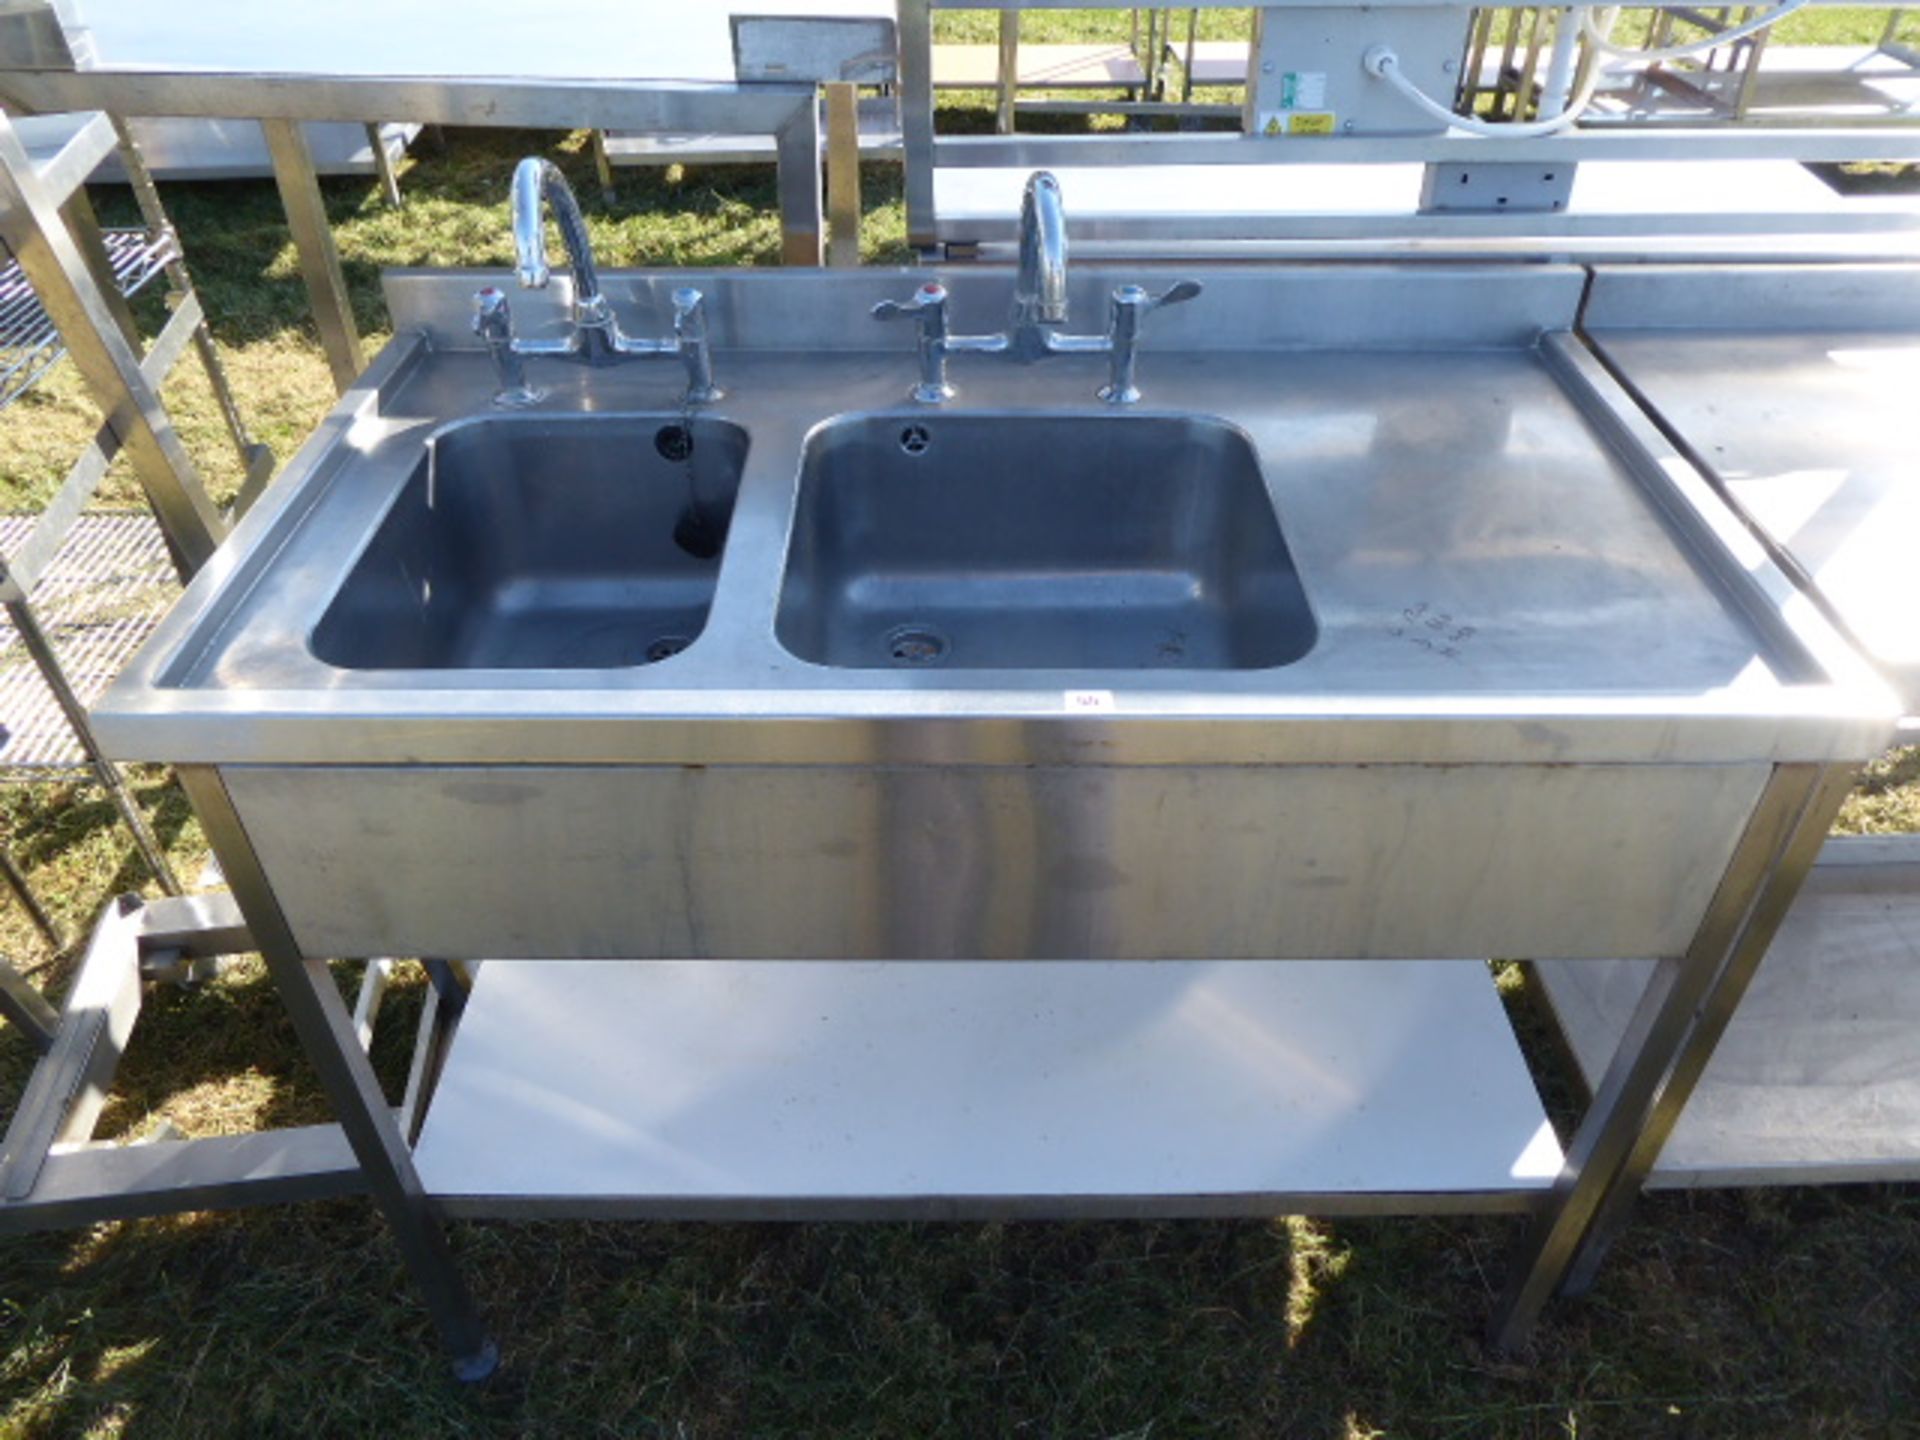 Stainless steel double bowl sink unit with taps, draining board and shelf under, 1200mm wide,